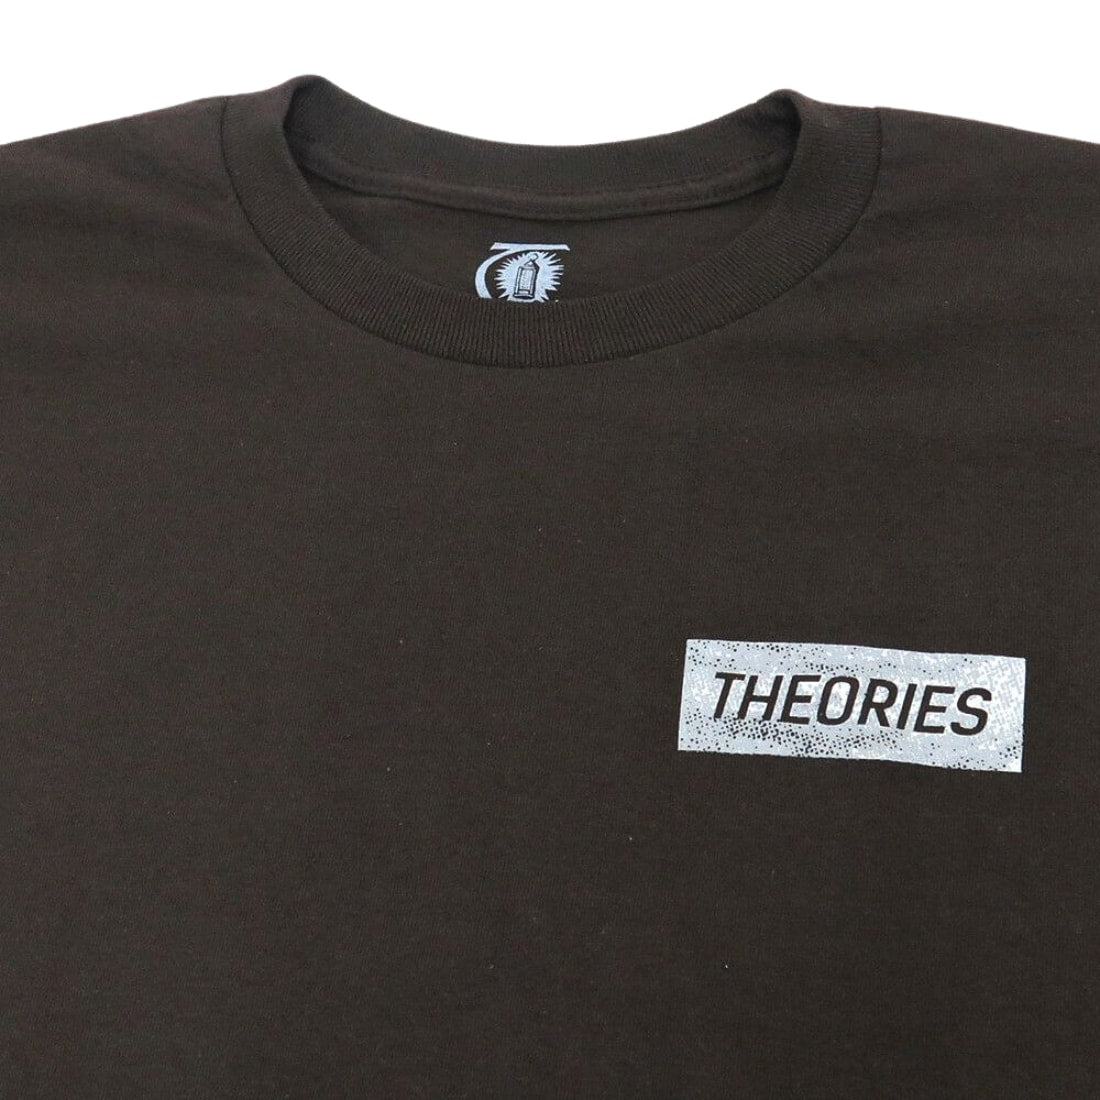 Theories Hand Of Theories Longsleeve T-Shirt - Brown - Mens Graphic T-Shirt by Theories